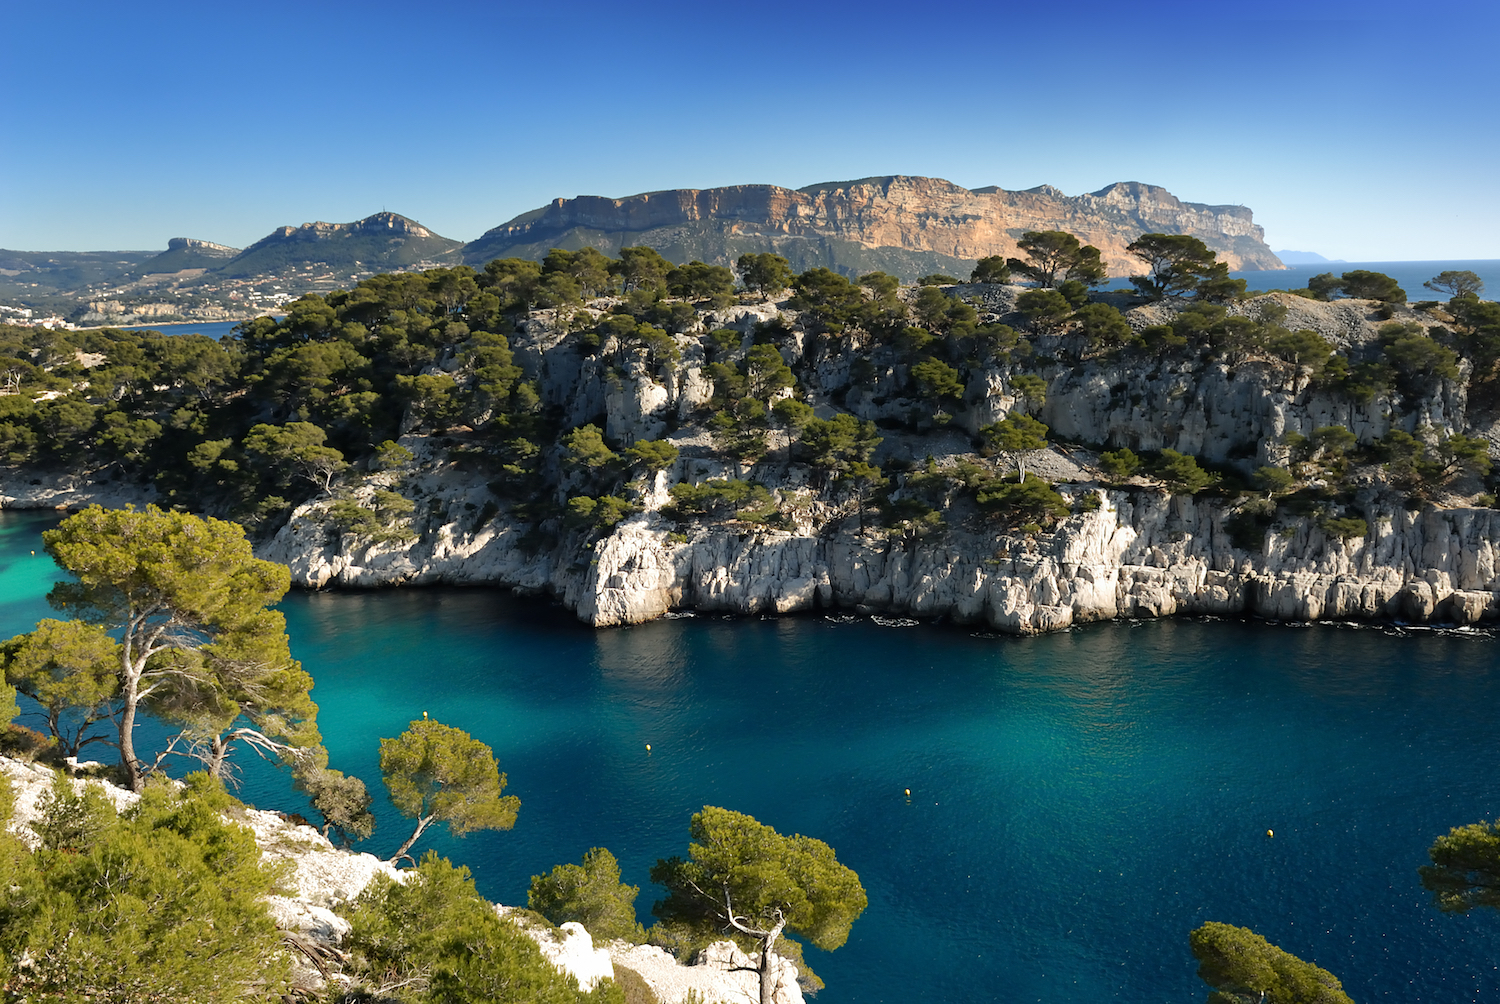 The calanque in Cassis on the Mediterranean